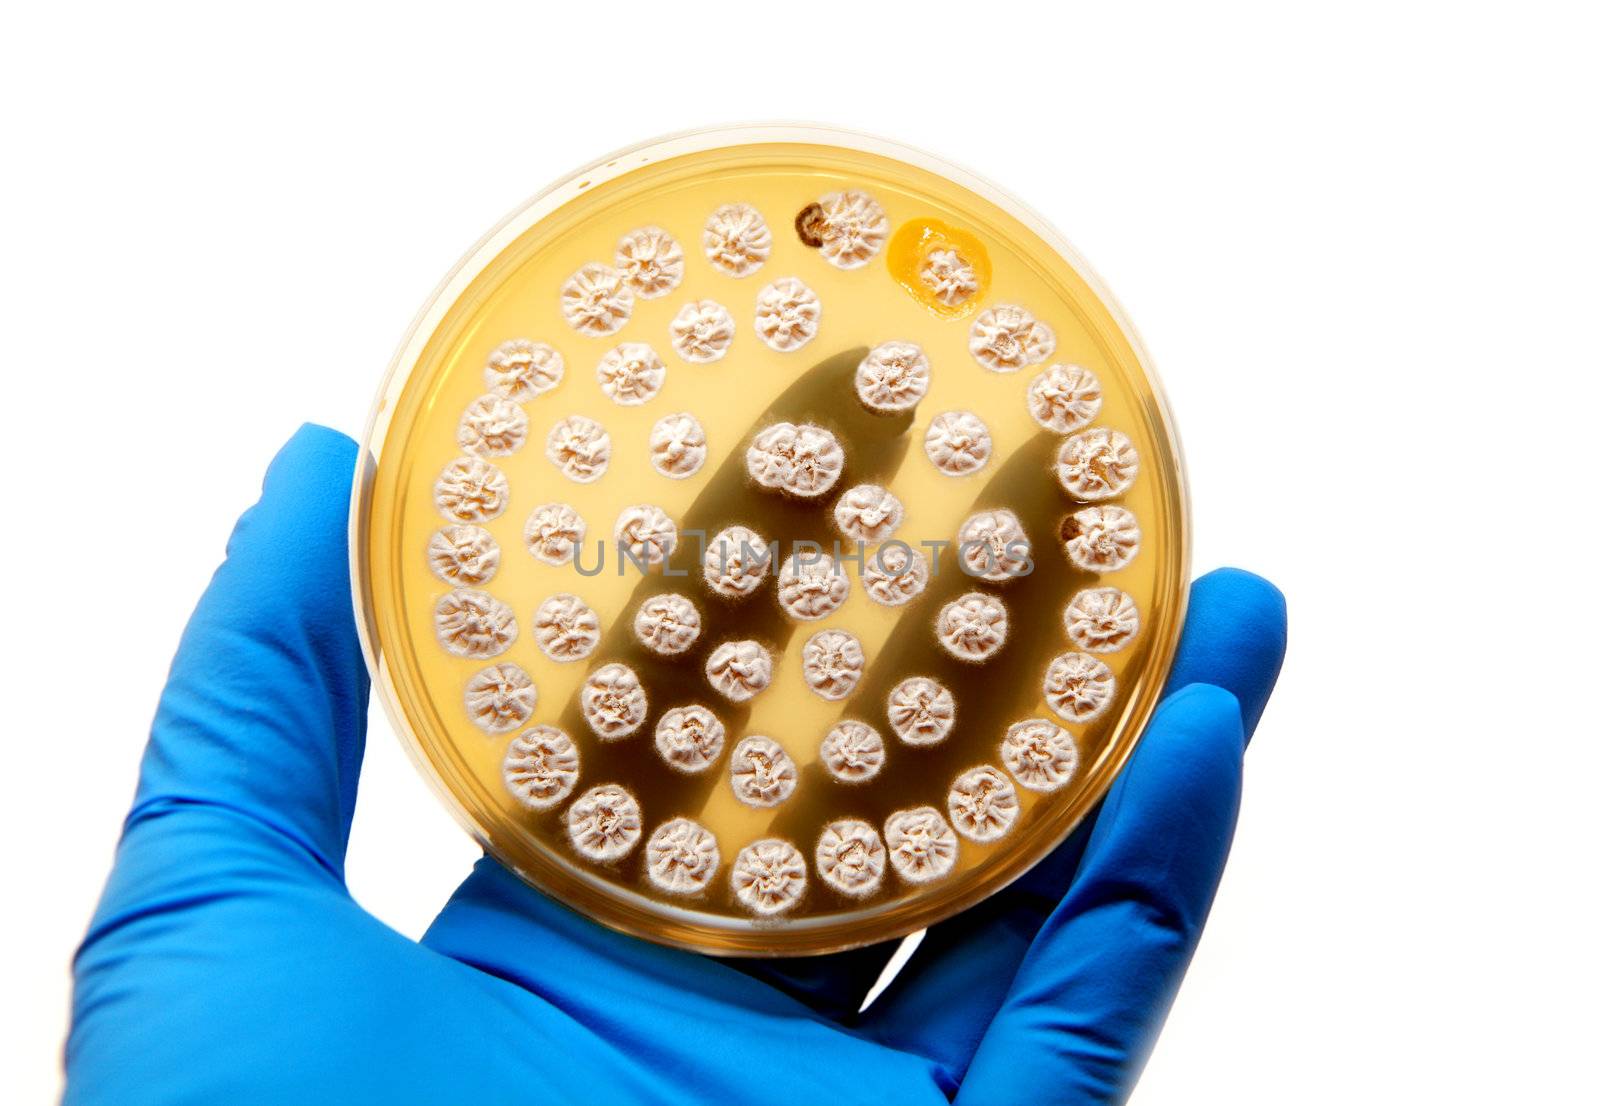 microbiological plate with fungi on white background